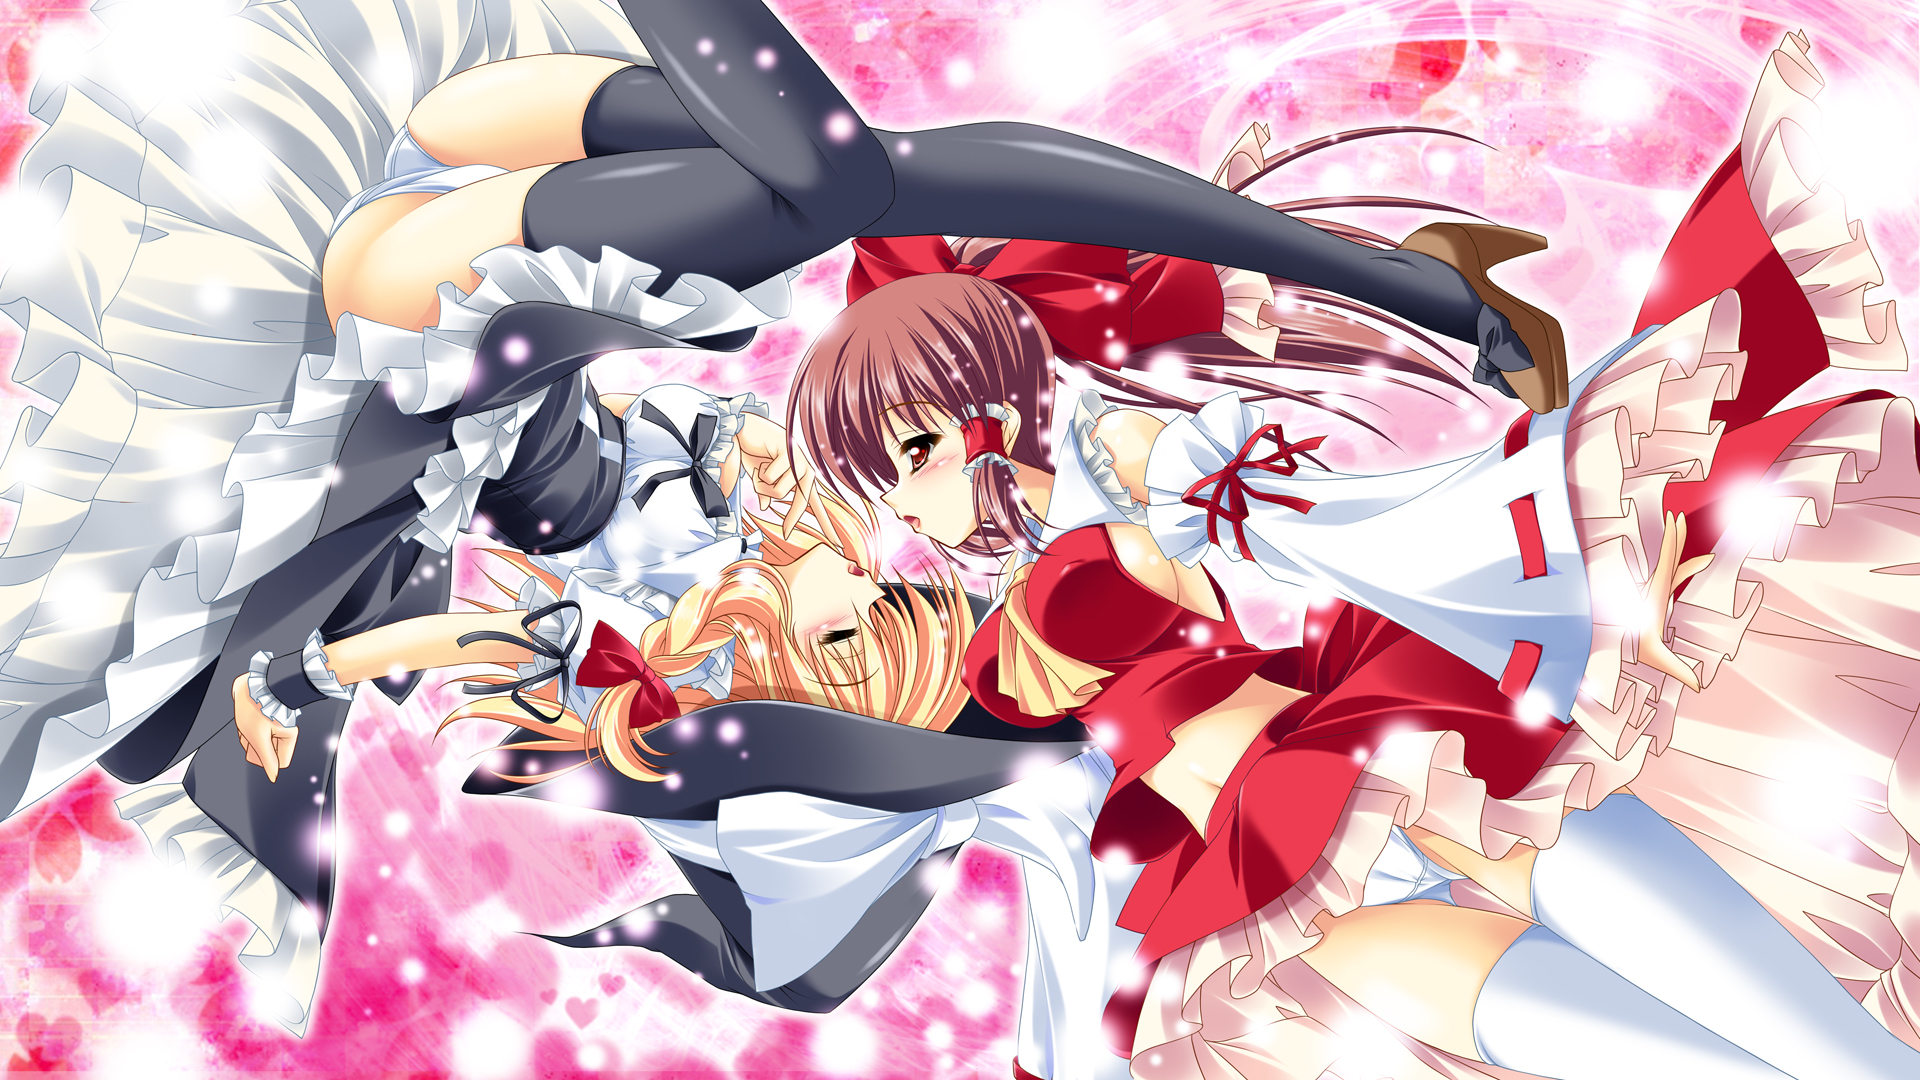 Download-project-shrine-maiden-hd-anime-wallpaper-anime-wallpaper